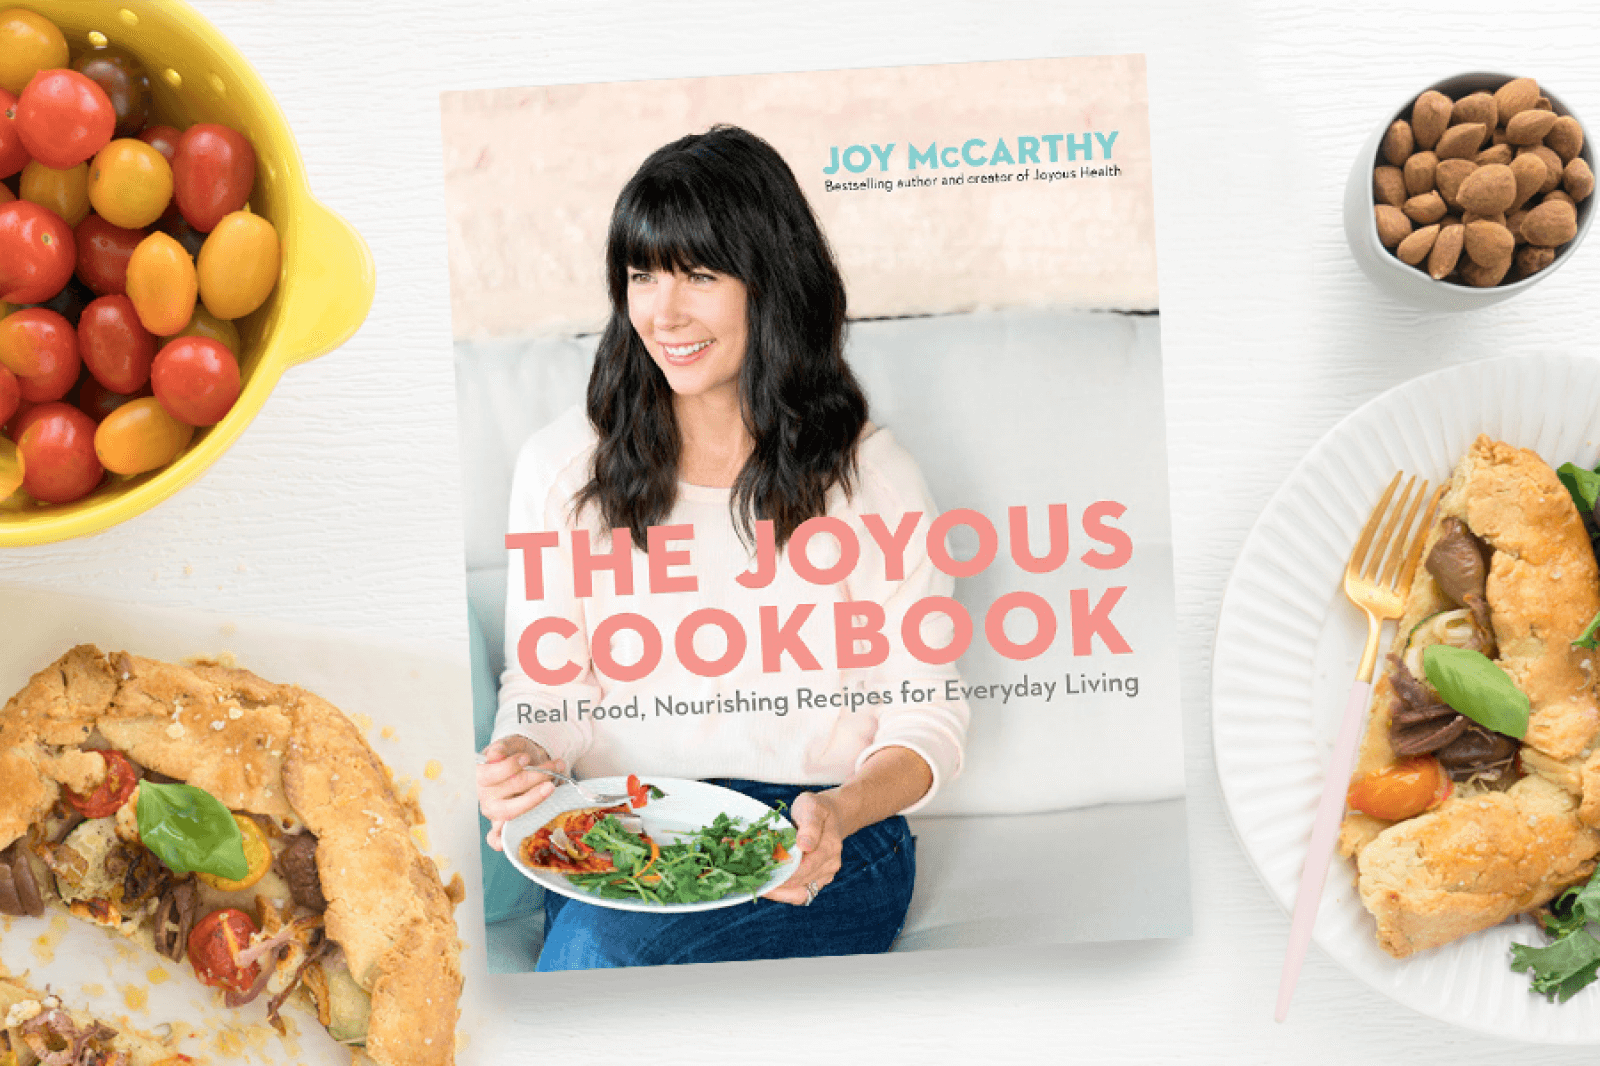 The Joyous Cookbook: Real Food, Nourishing Recipes for Everyday Living thumbnail